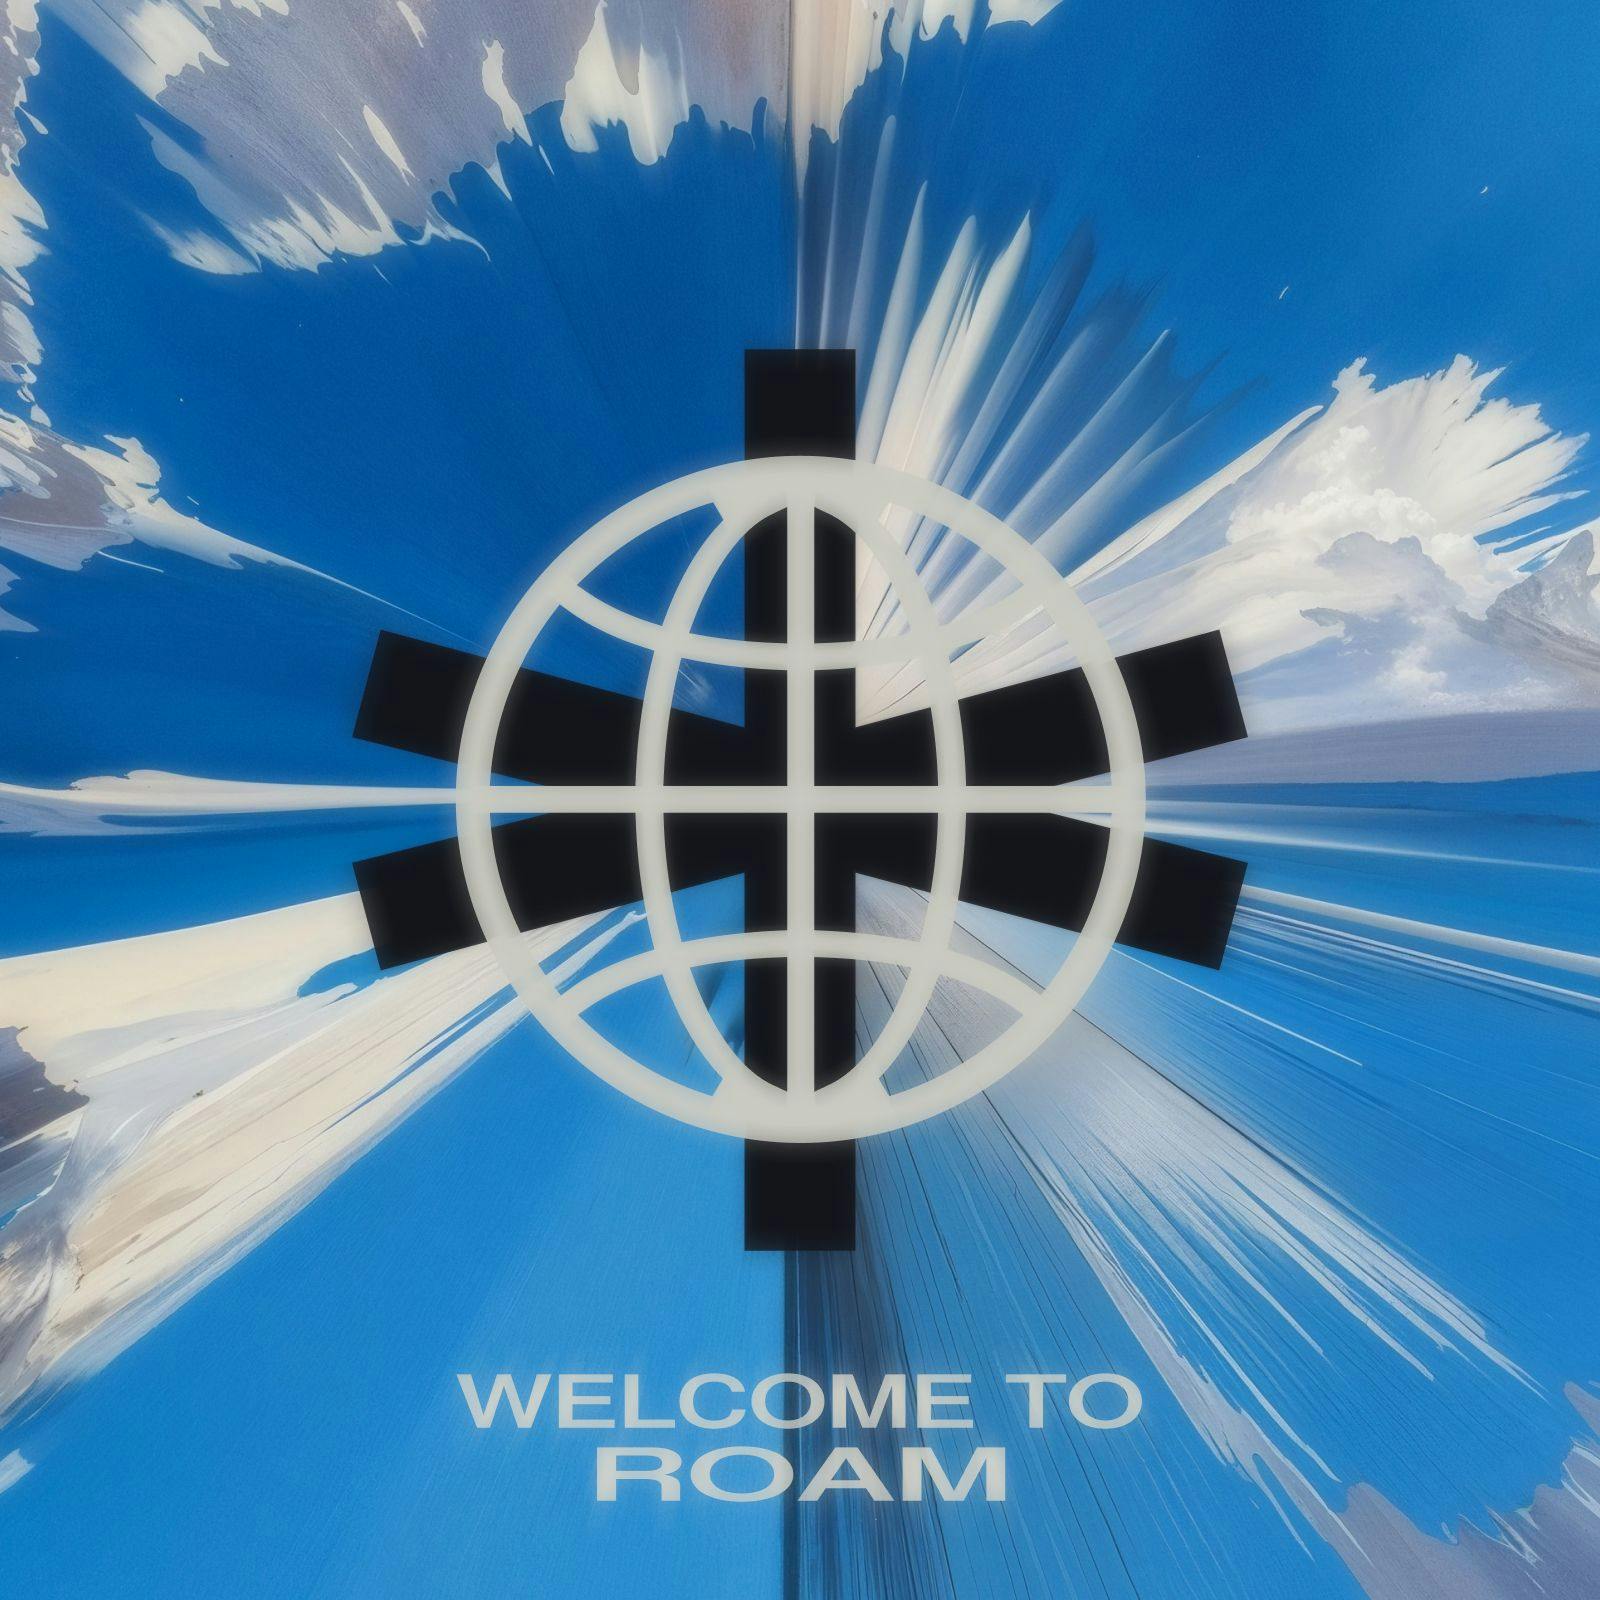 Welcome to Roam